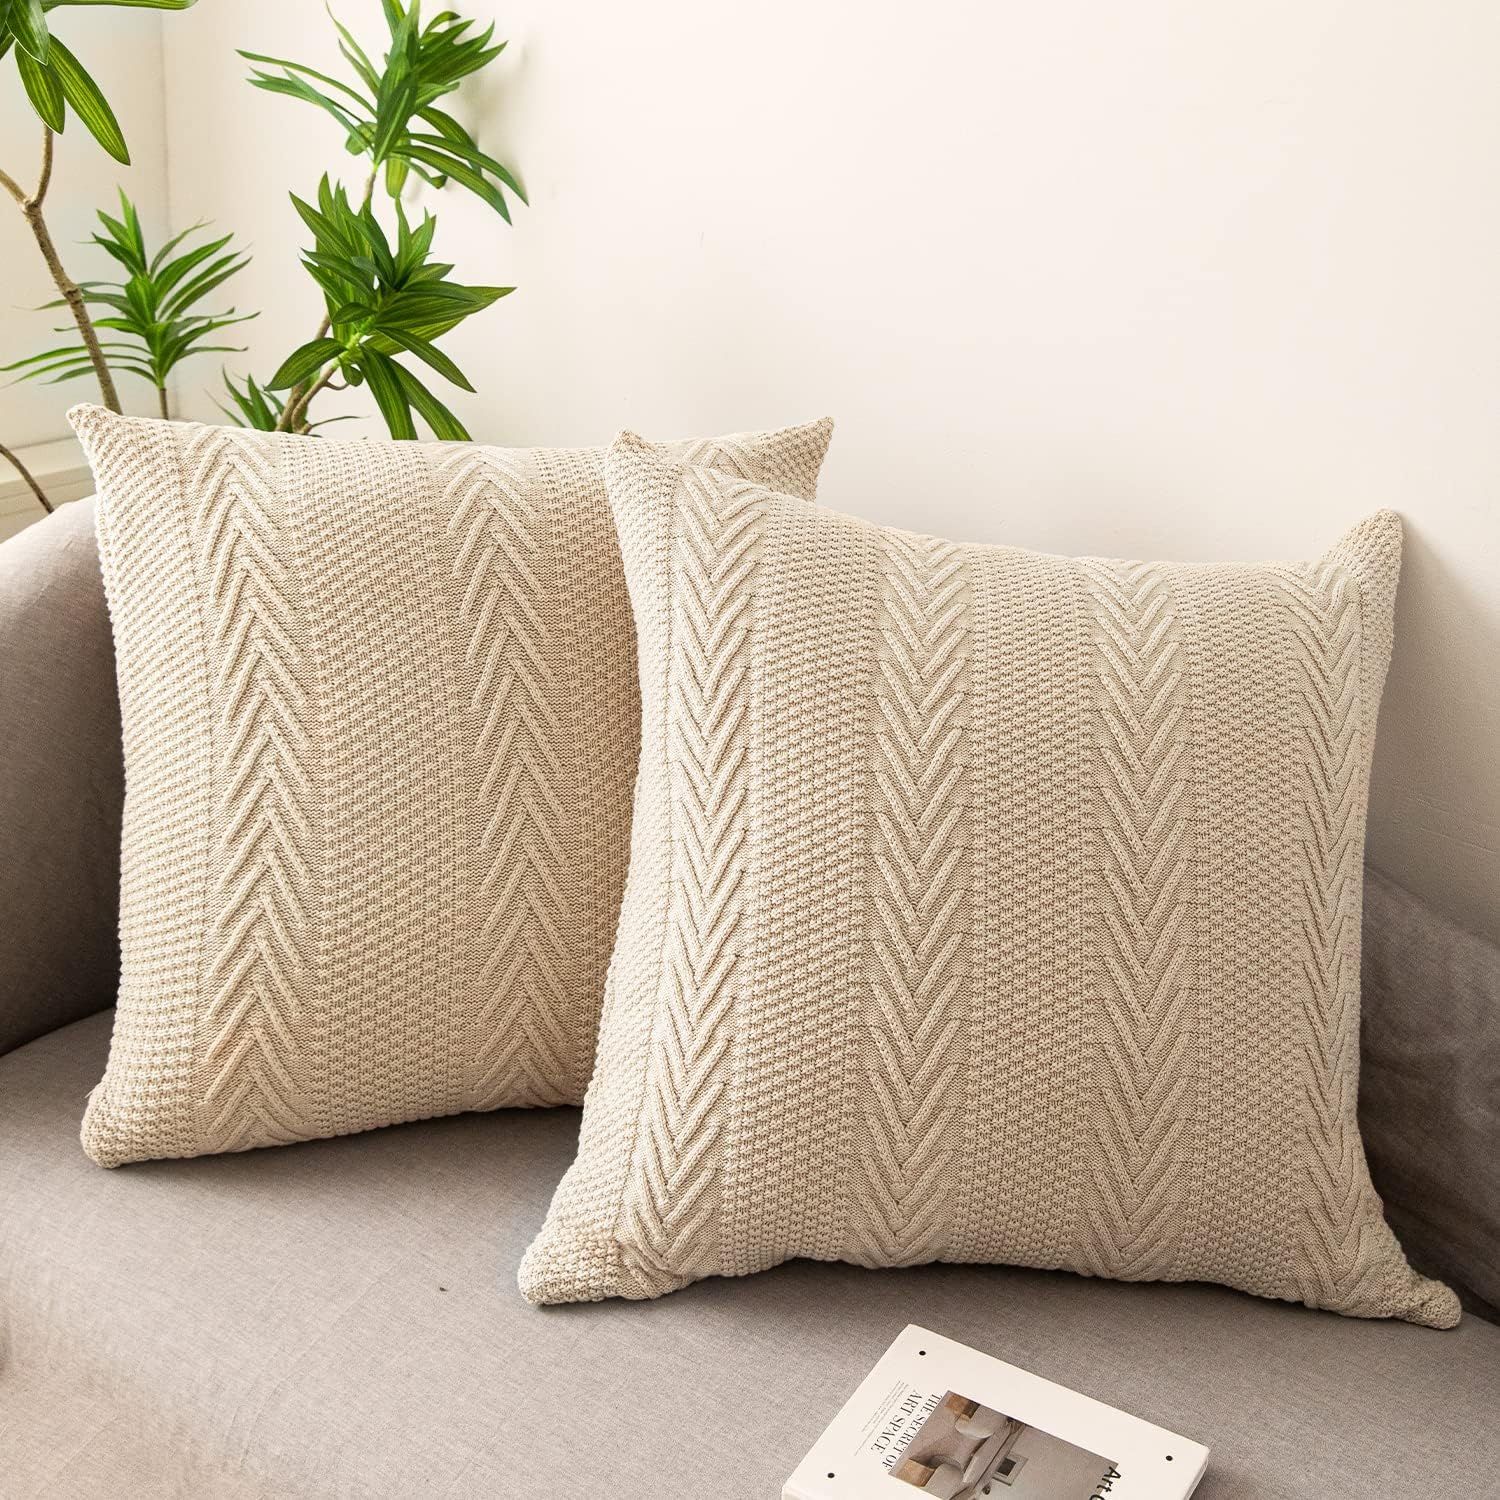 LiBcmlian Beige Knitted Throw Pillow Covers 24x24 Set of 2 Cotton Pillow Cushion Cases Cable Knit... | Amazon (US)